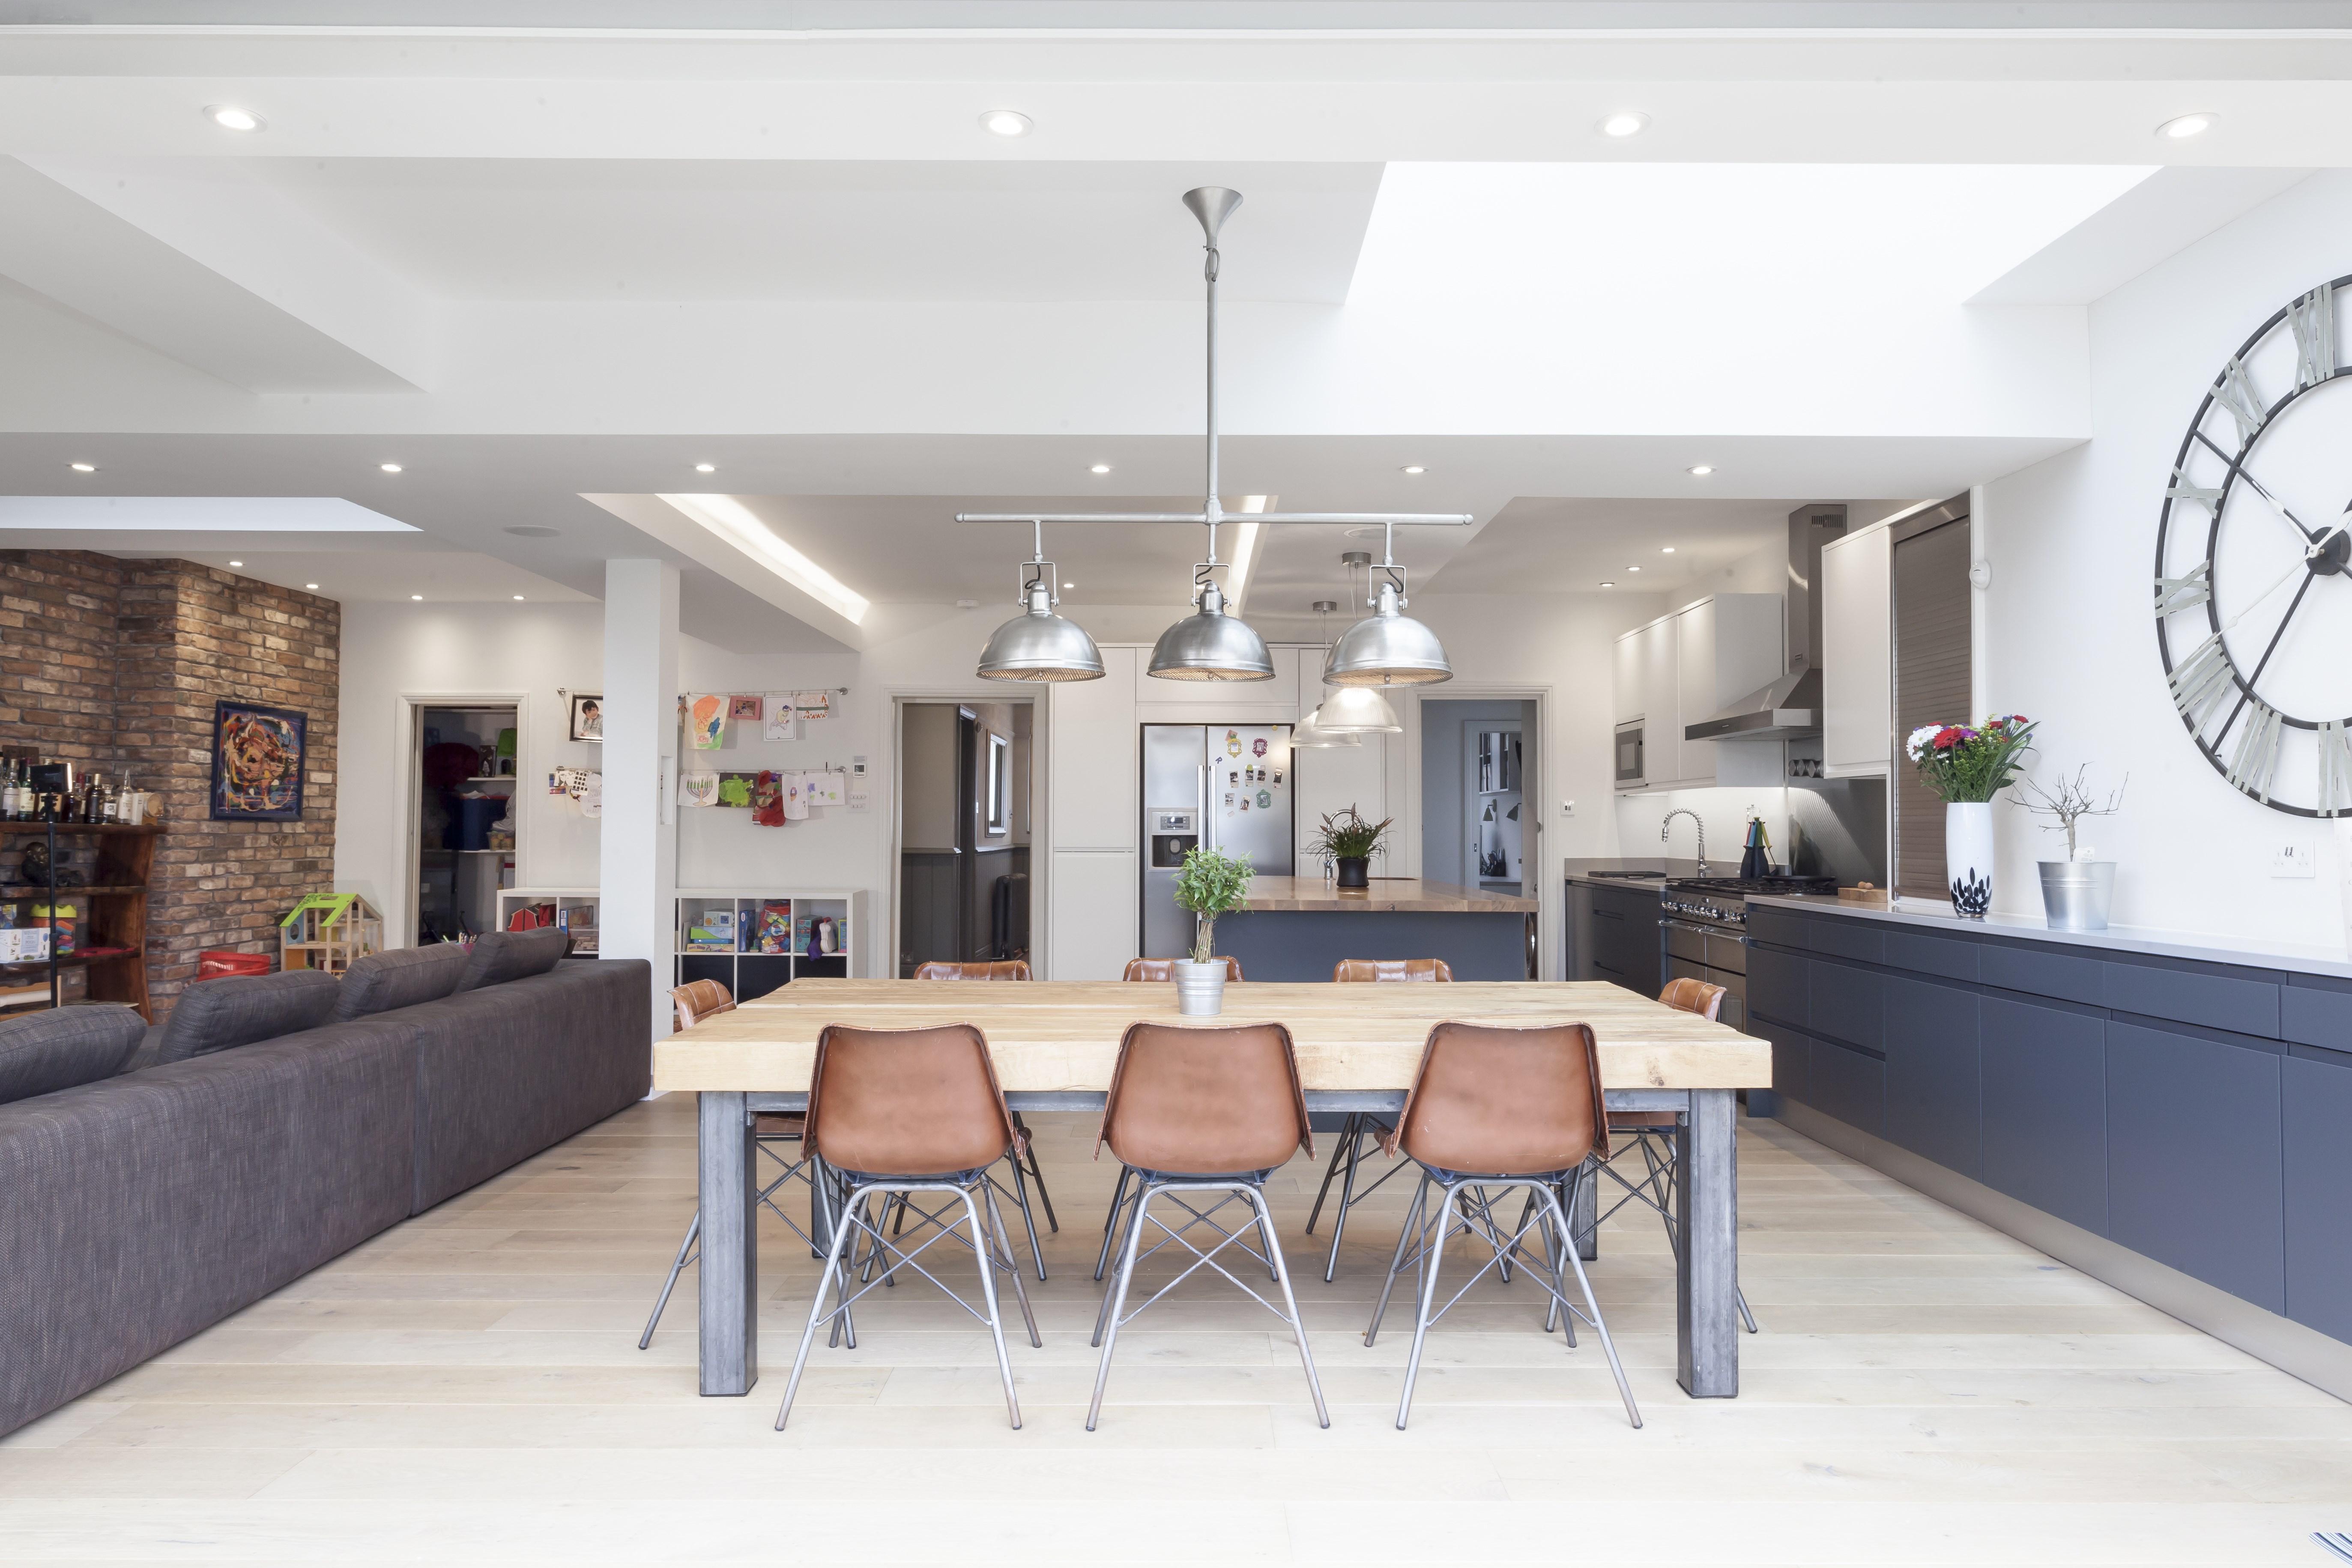 </p> <p>Find your ideal home design pro on designfor-me.com - get matched and see who's interested in your home project. Click image to see more inspiration from our design pros</p> <p>Design by Phil, architect from Haringey, London</p> <p>#architecture #homedesign #modernhomes #homeinspiration #kitchens #kitchendesign #kitcheninspiration #kitchenideas #kitchengoals #extensions #extensiondesign #extensioninspiration #extensionideas #houseextension #skylights #rooflights </p> <p>